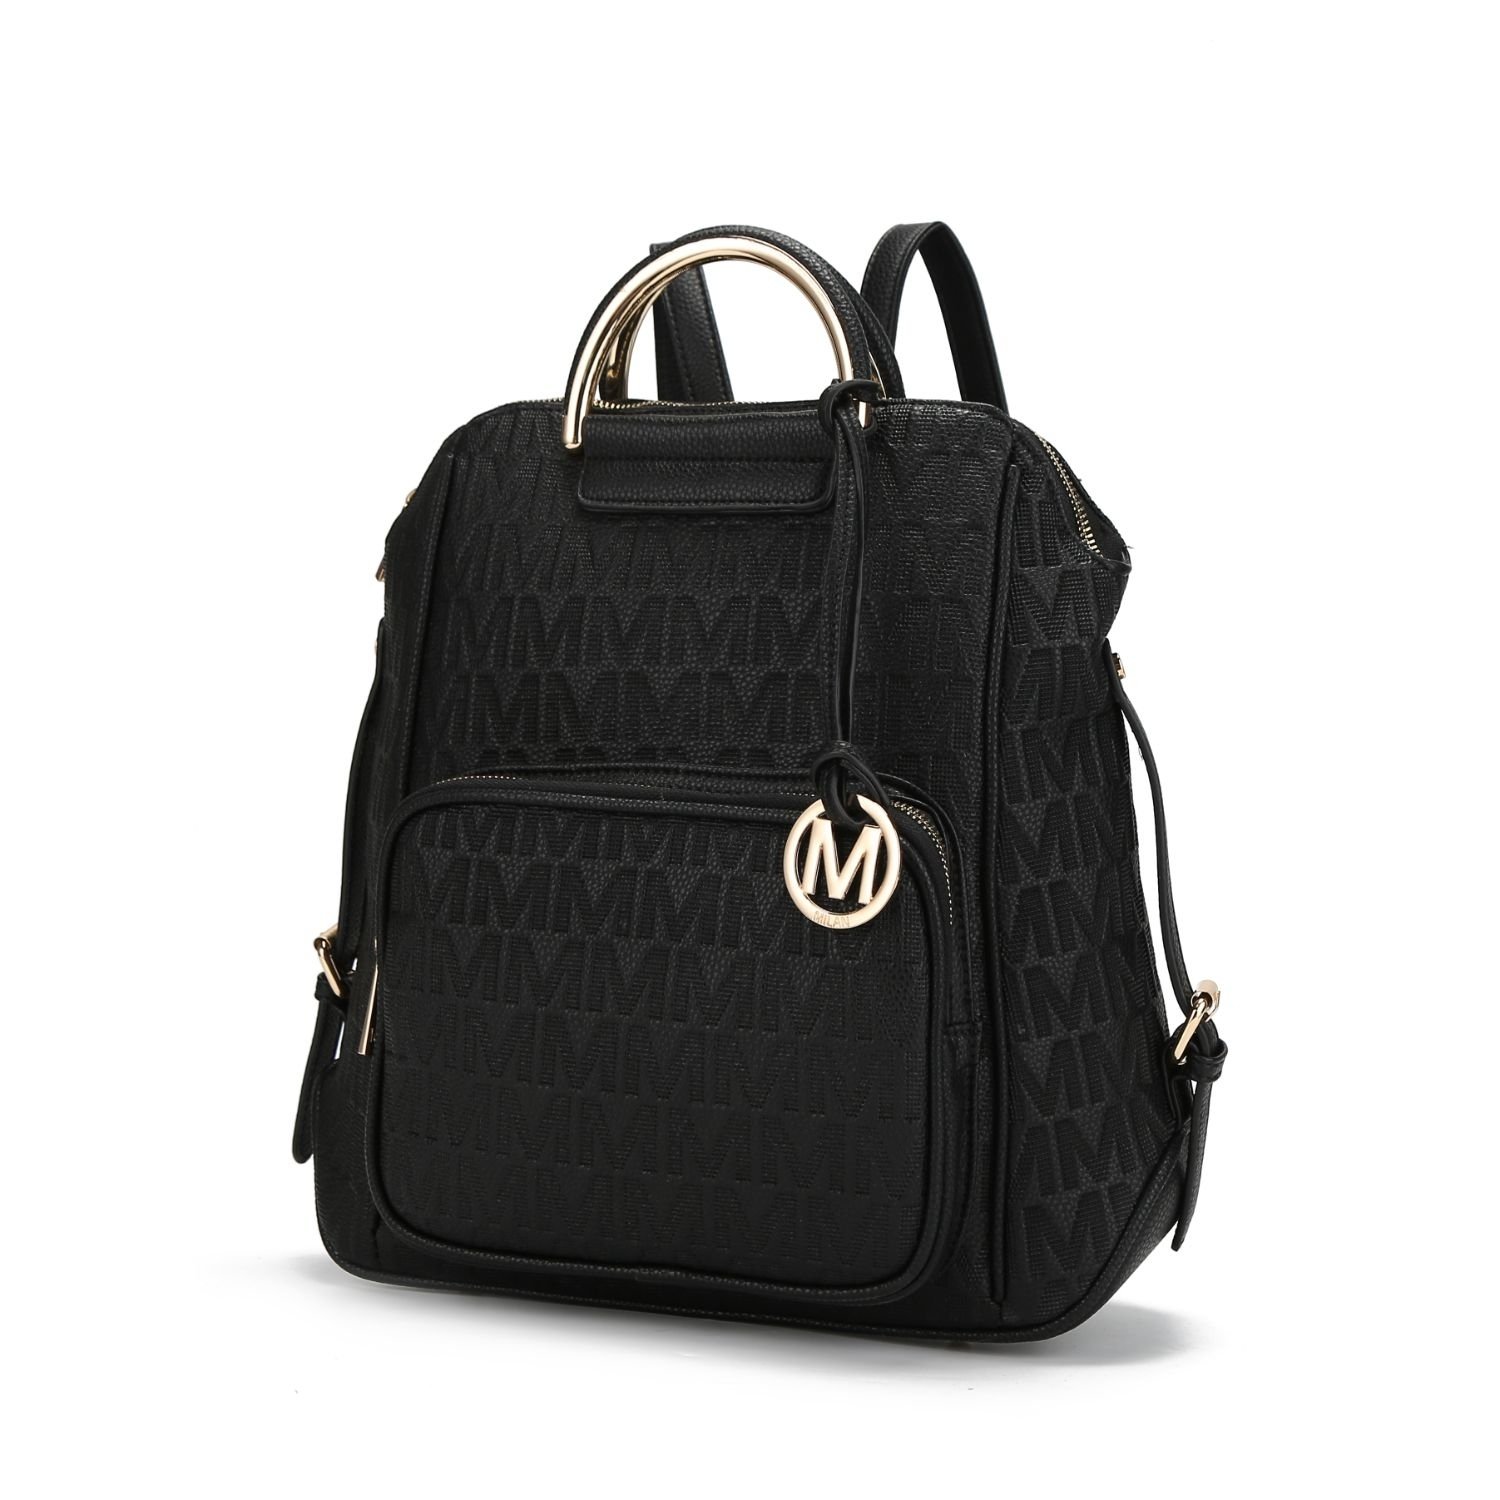 MKF Collection Torra Milan .M. Signature Trendy Backpack By Mia K. - Beige